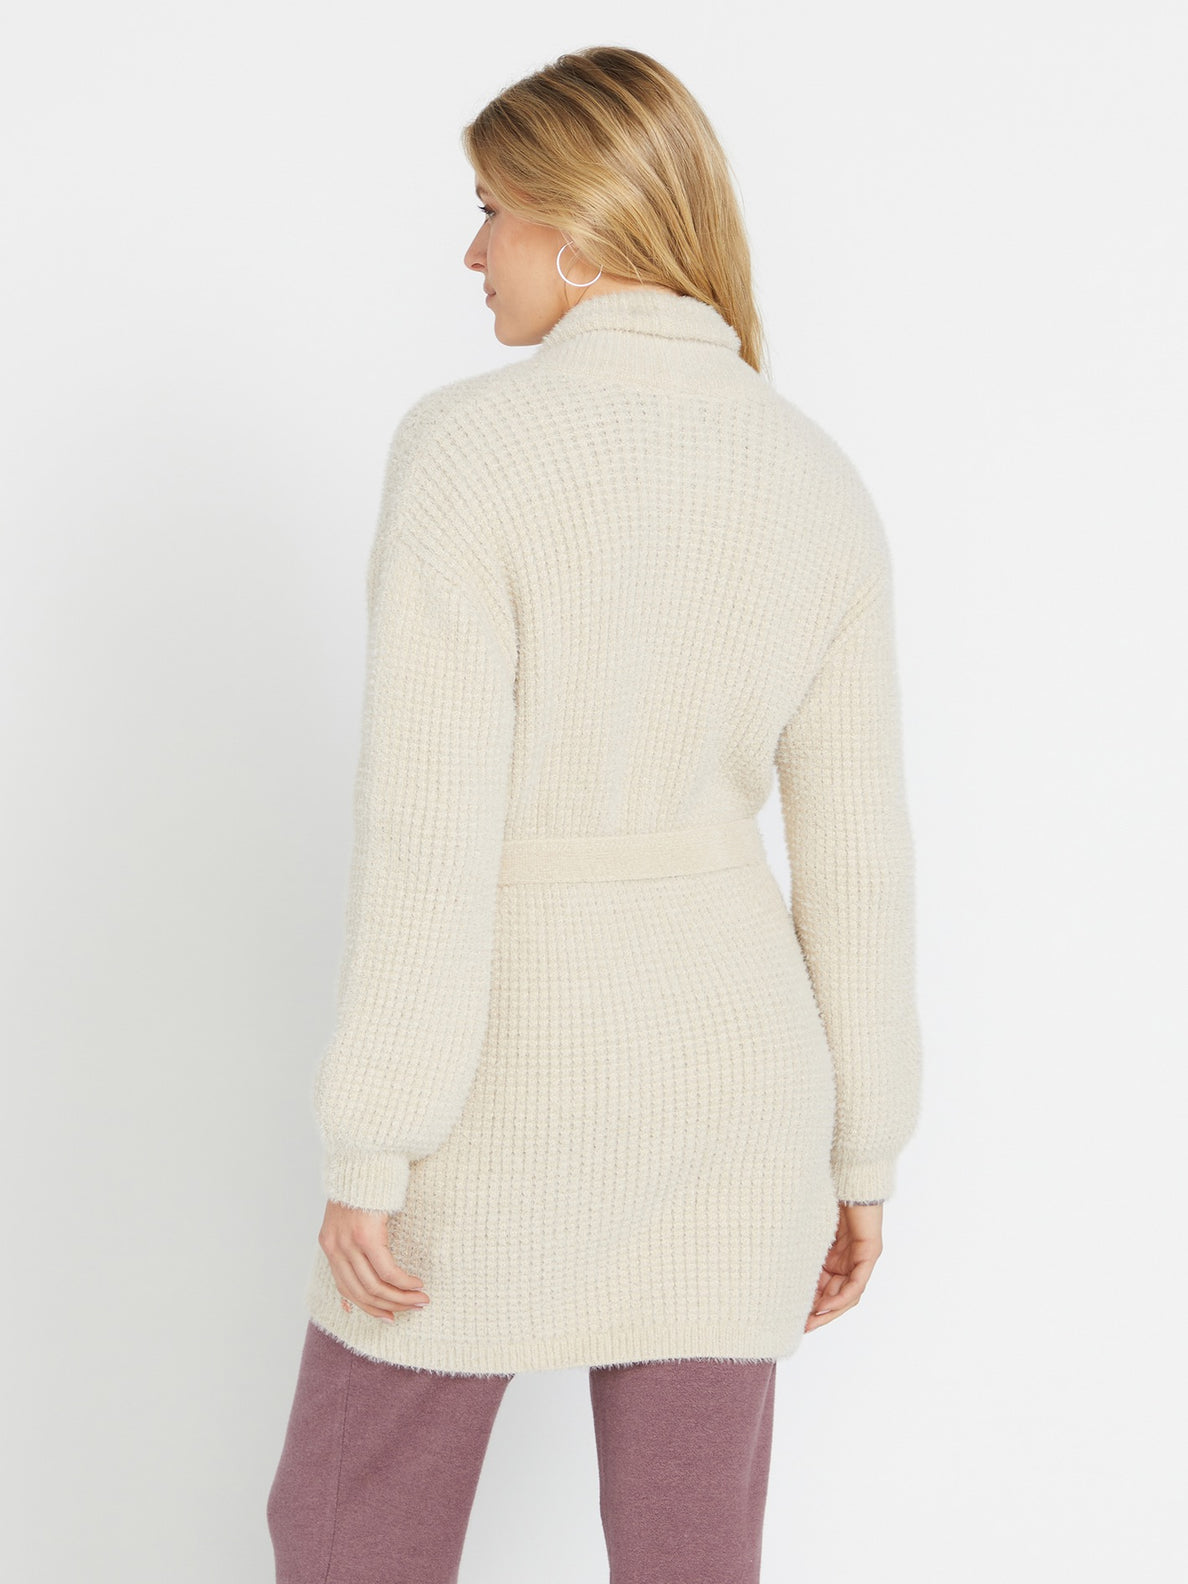 Lived in Lounge Cozy Wrap Cardigan - Cream